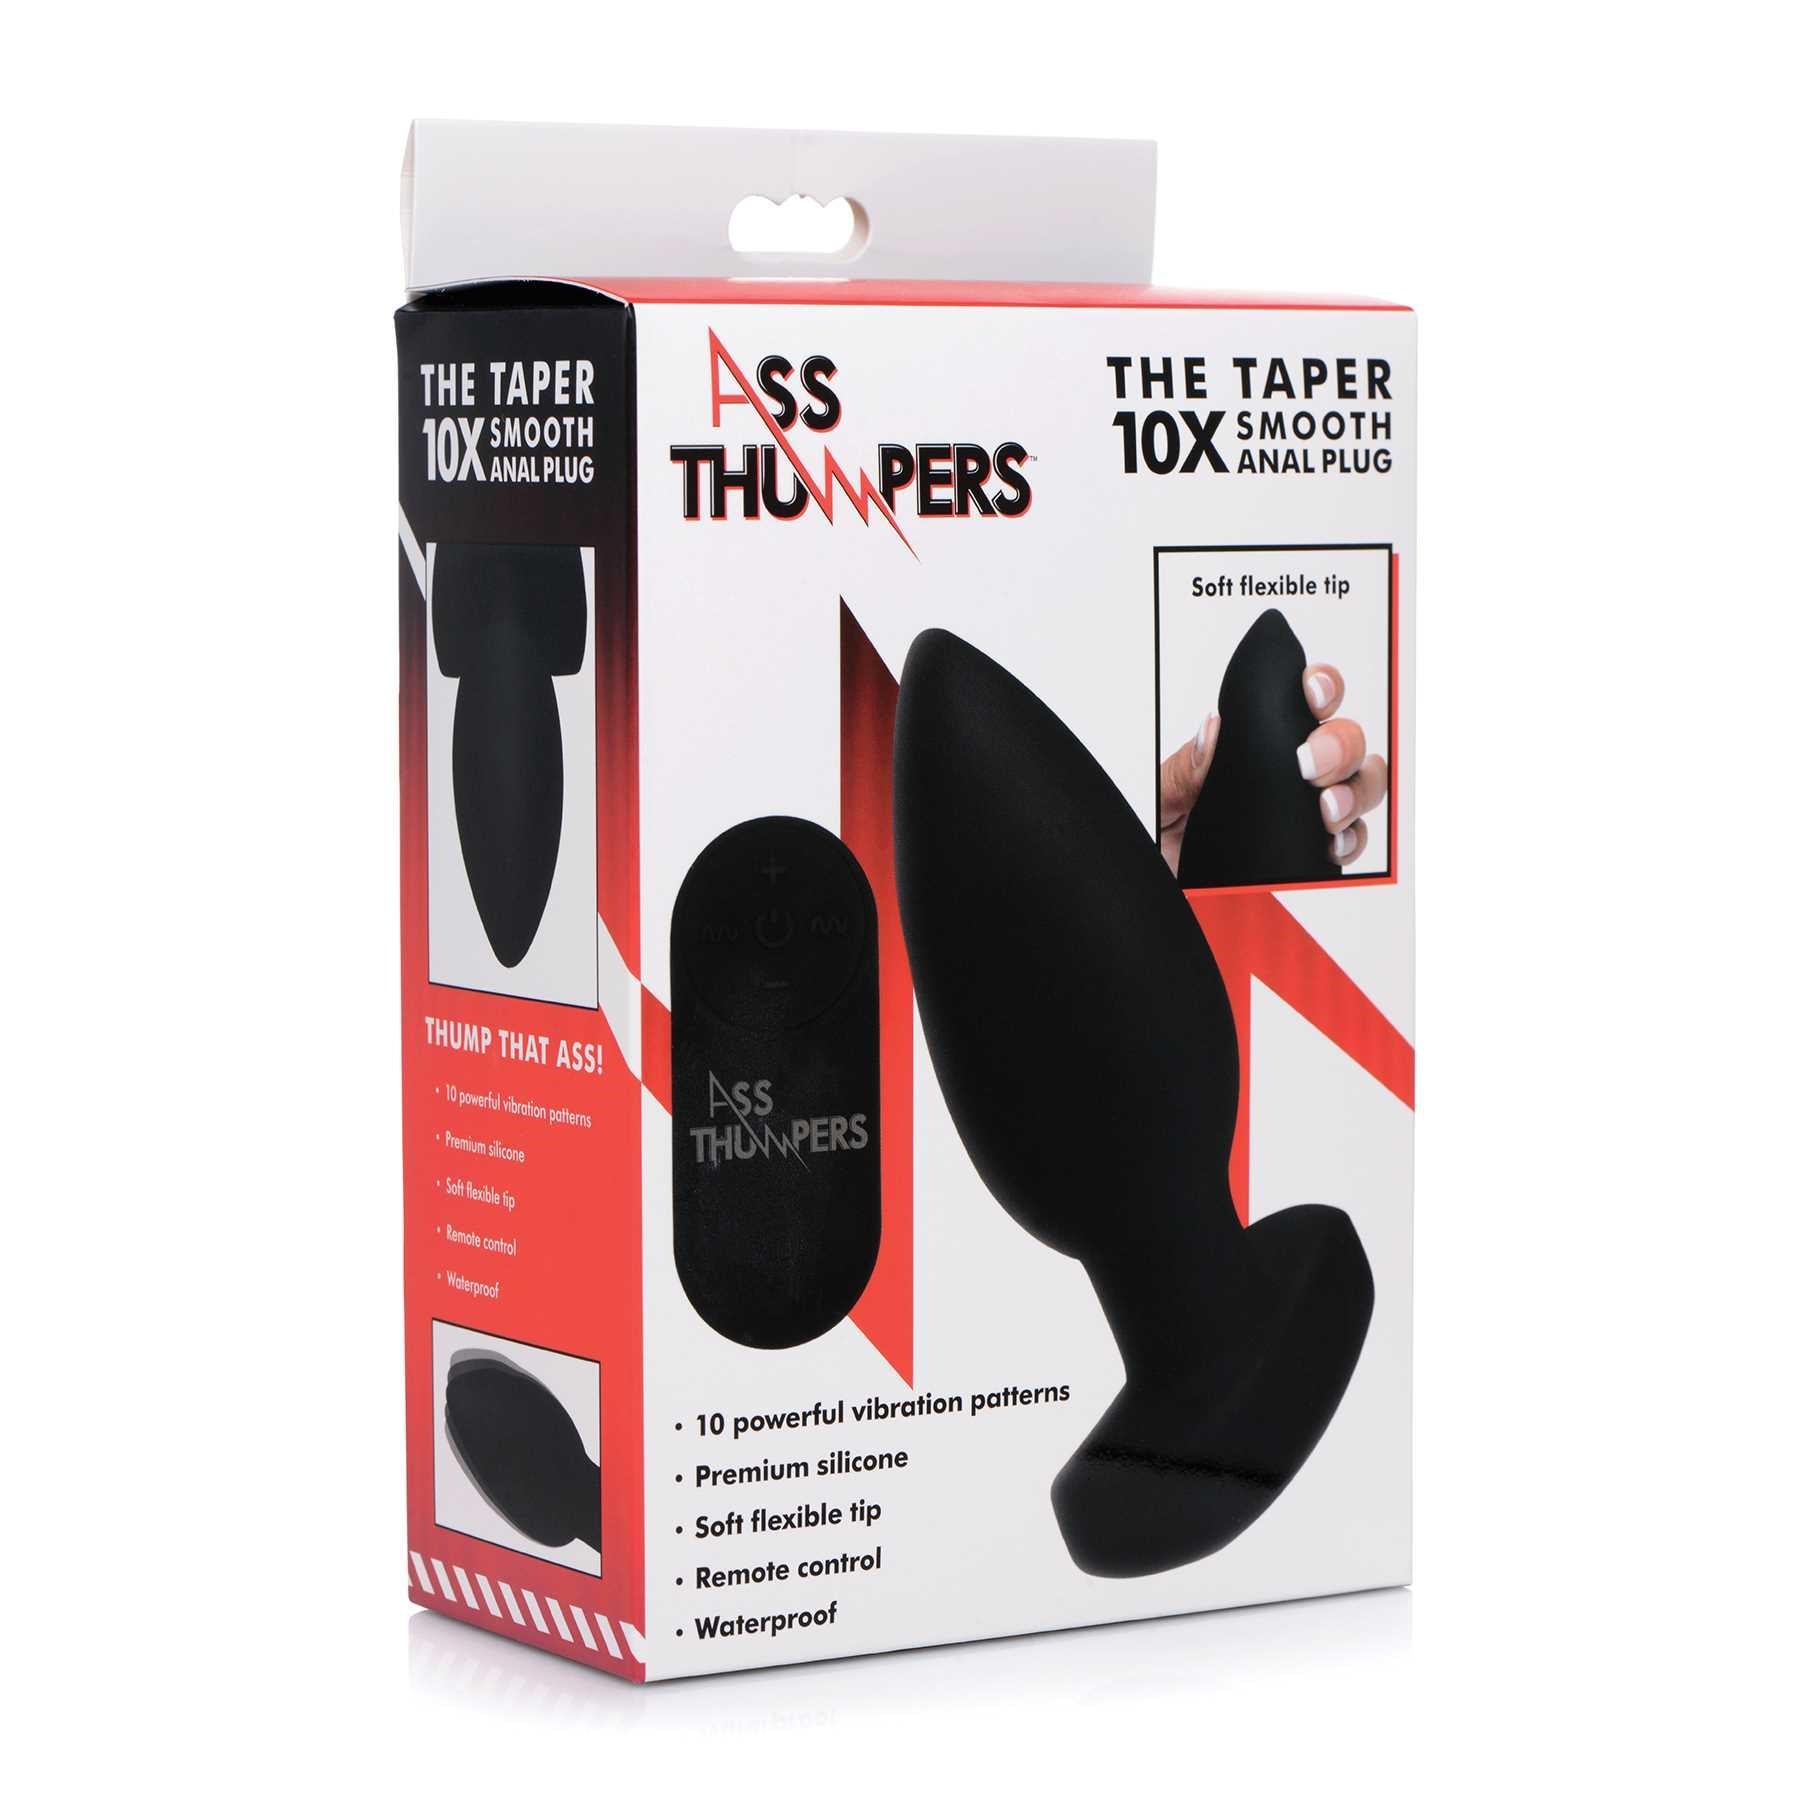 Taper 10X Smooth Silicone Vibrating Plug packaging